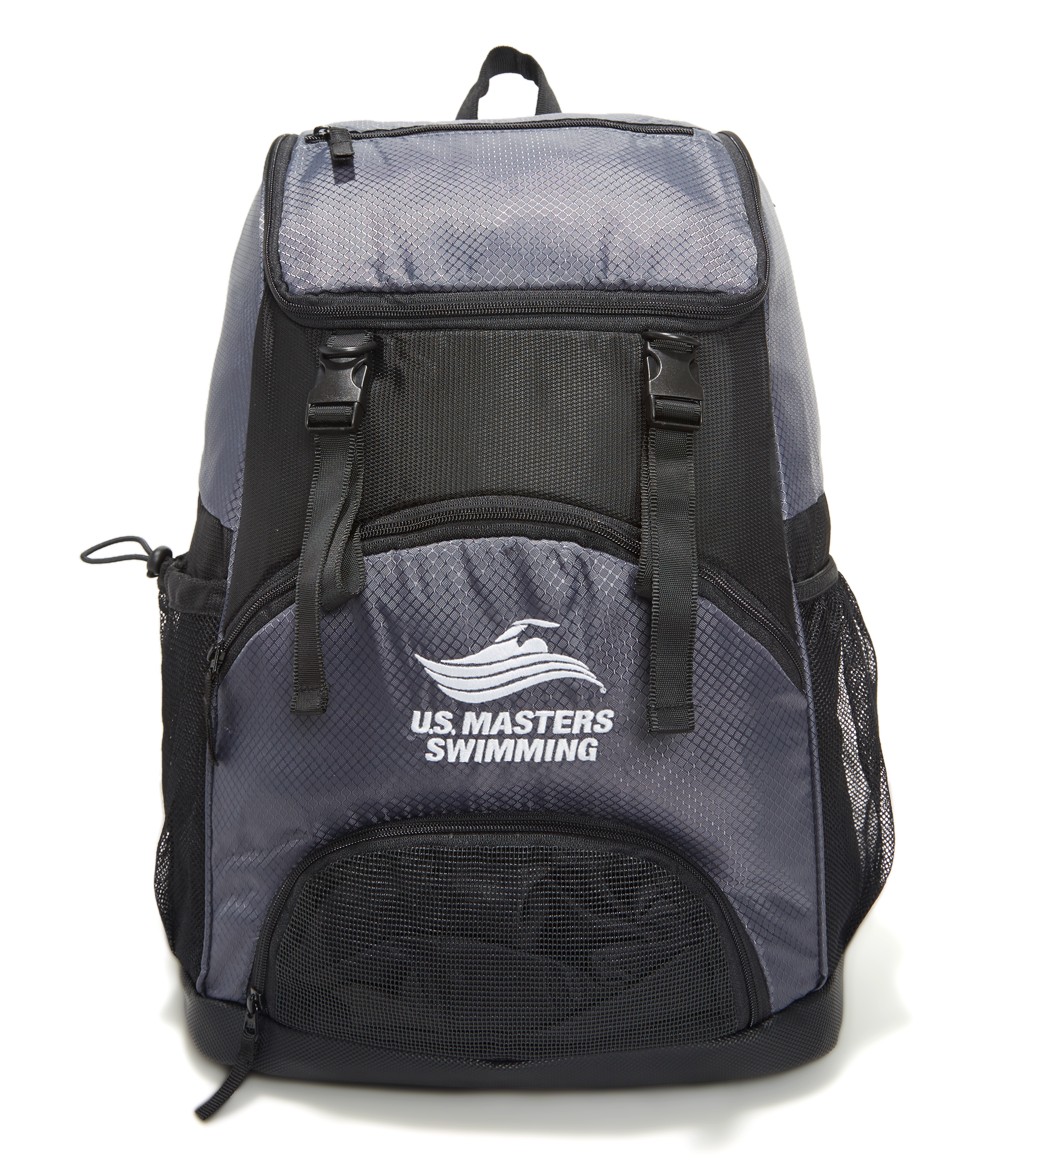 U.s. Masters Swimming Usms Large Athletic Backpack - Charcoal Grey Polyester - Swimoutlet.com